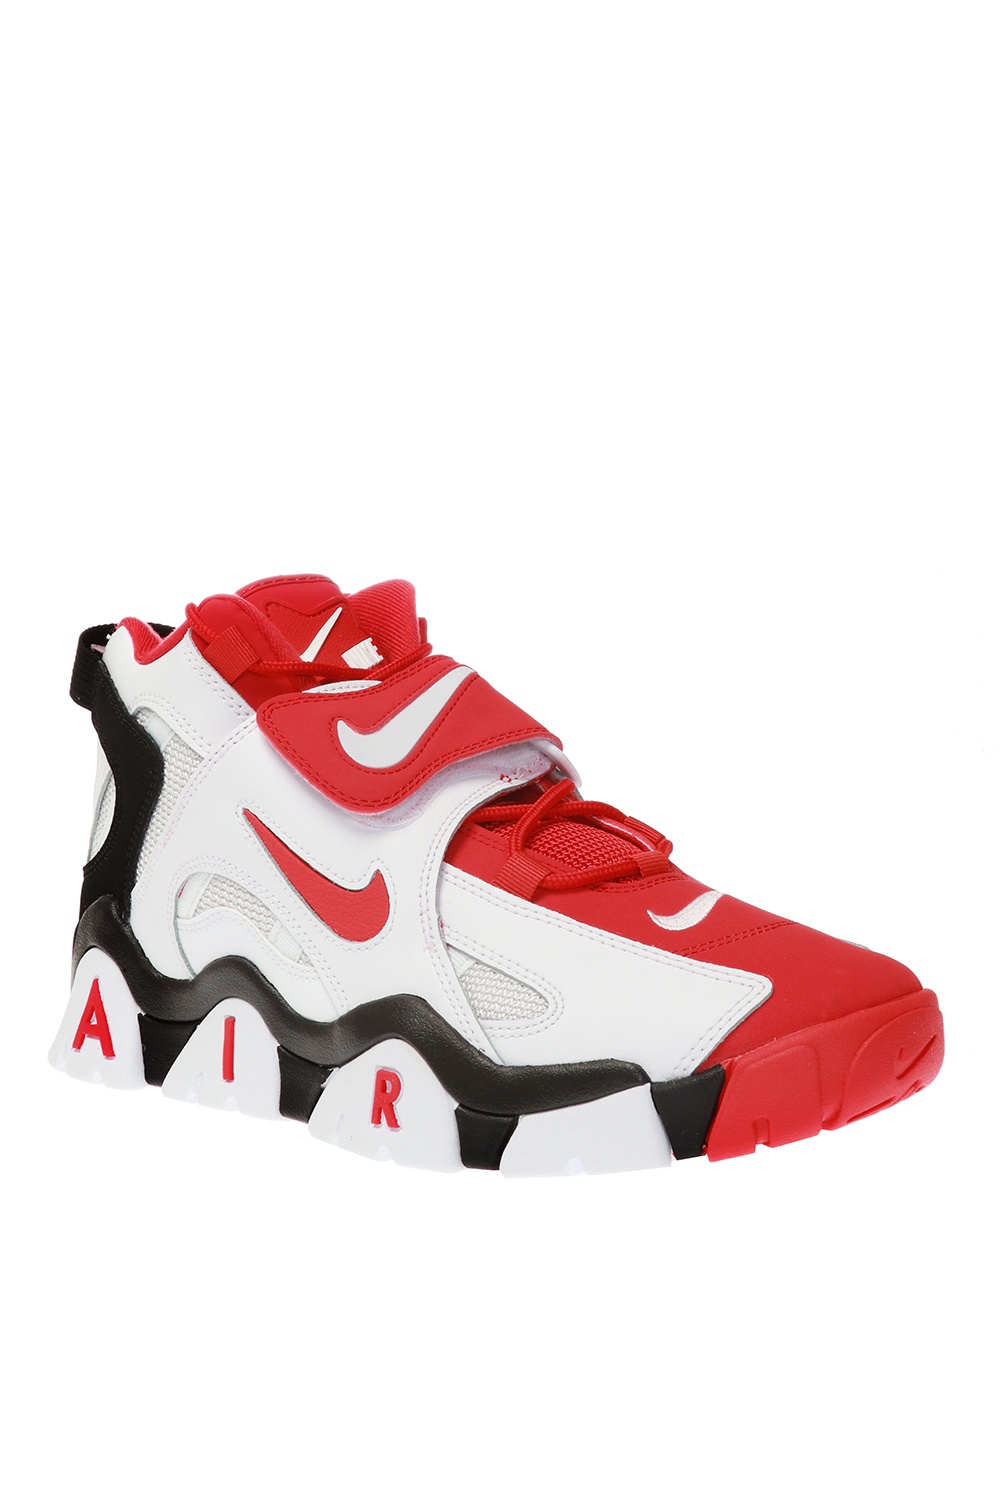 nike air barrage mid red and white